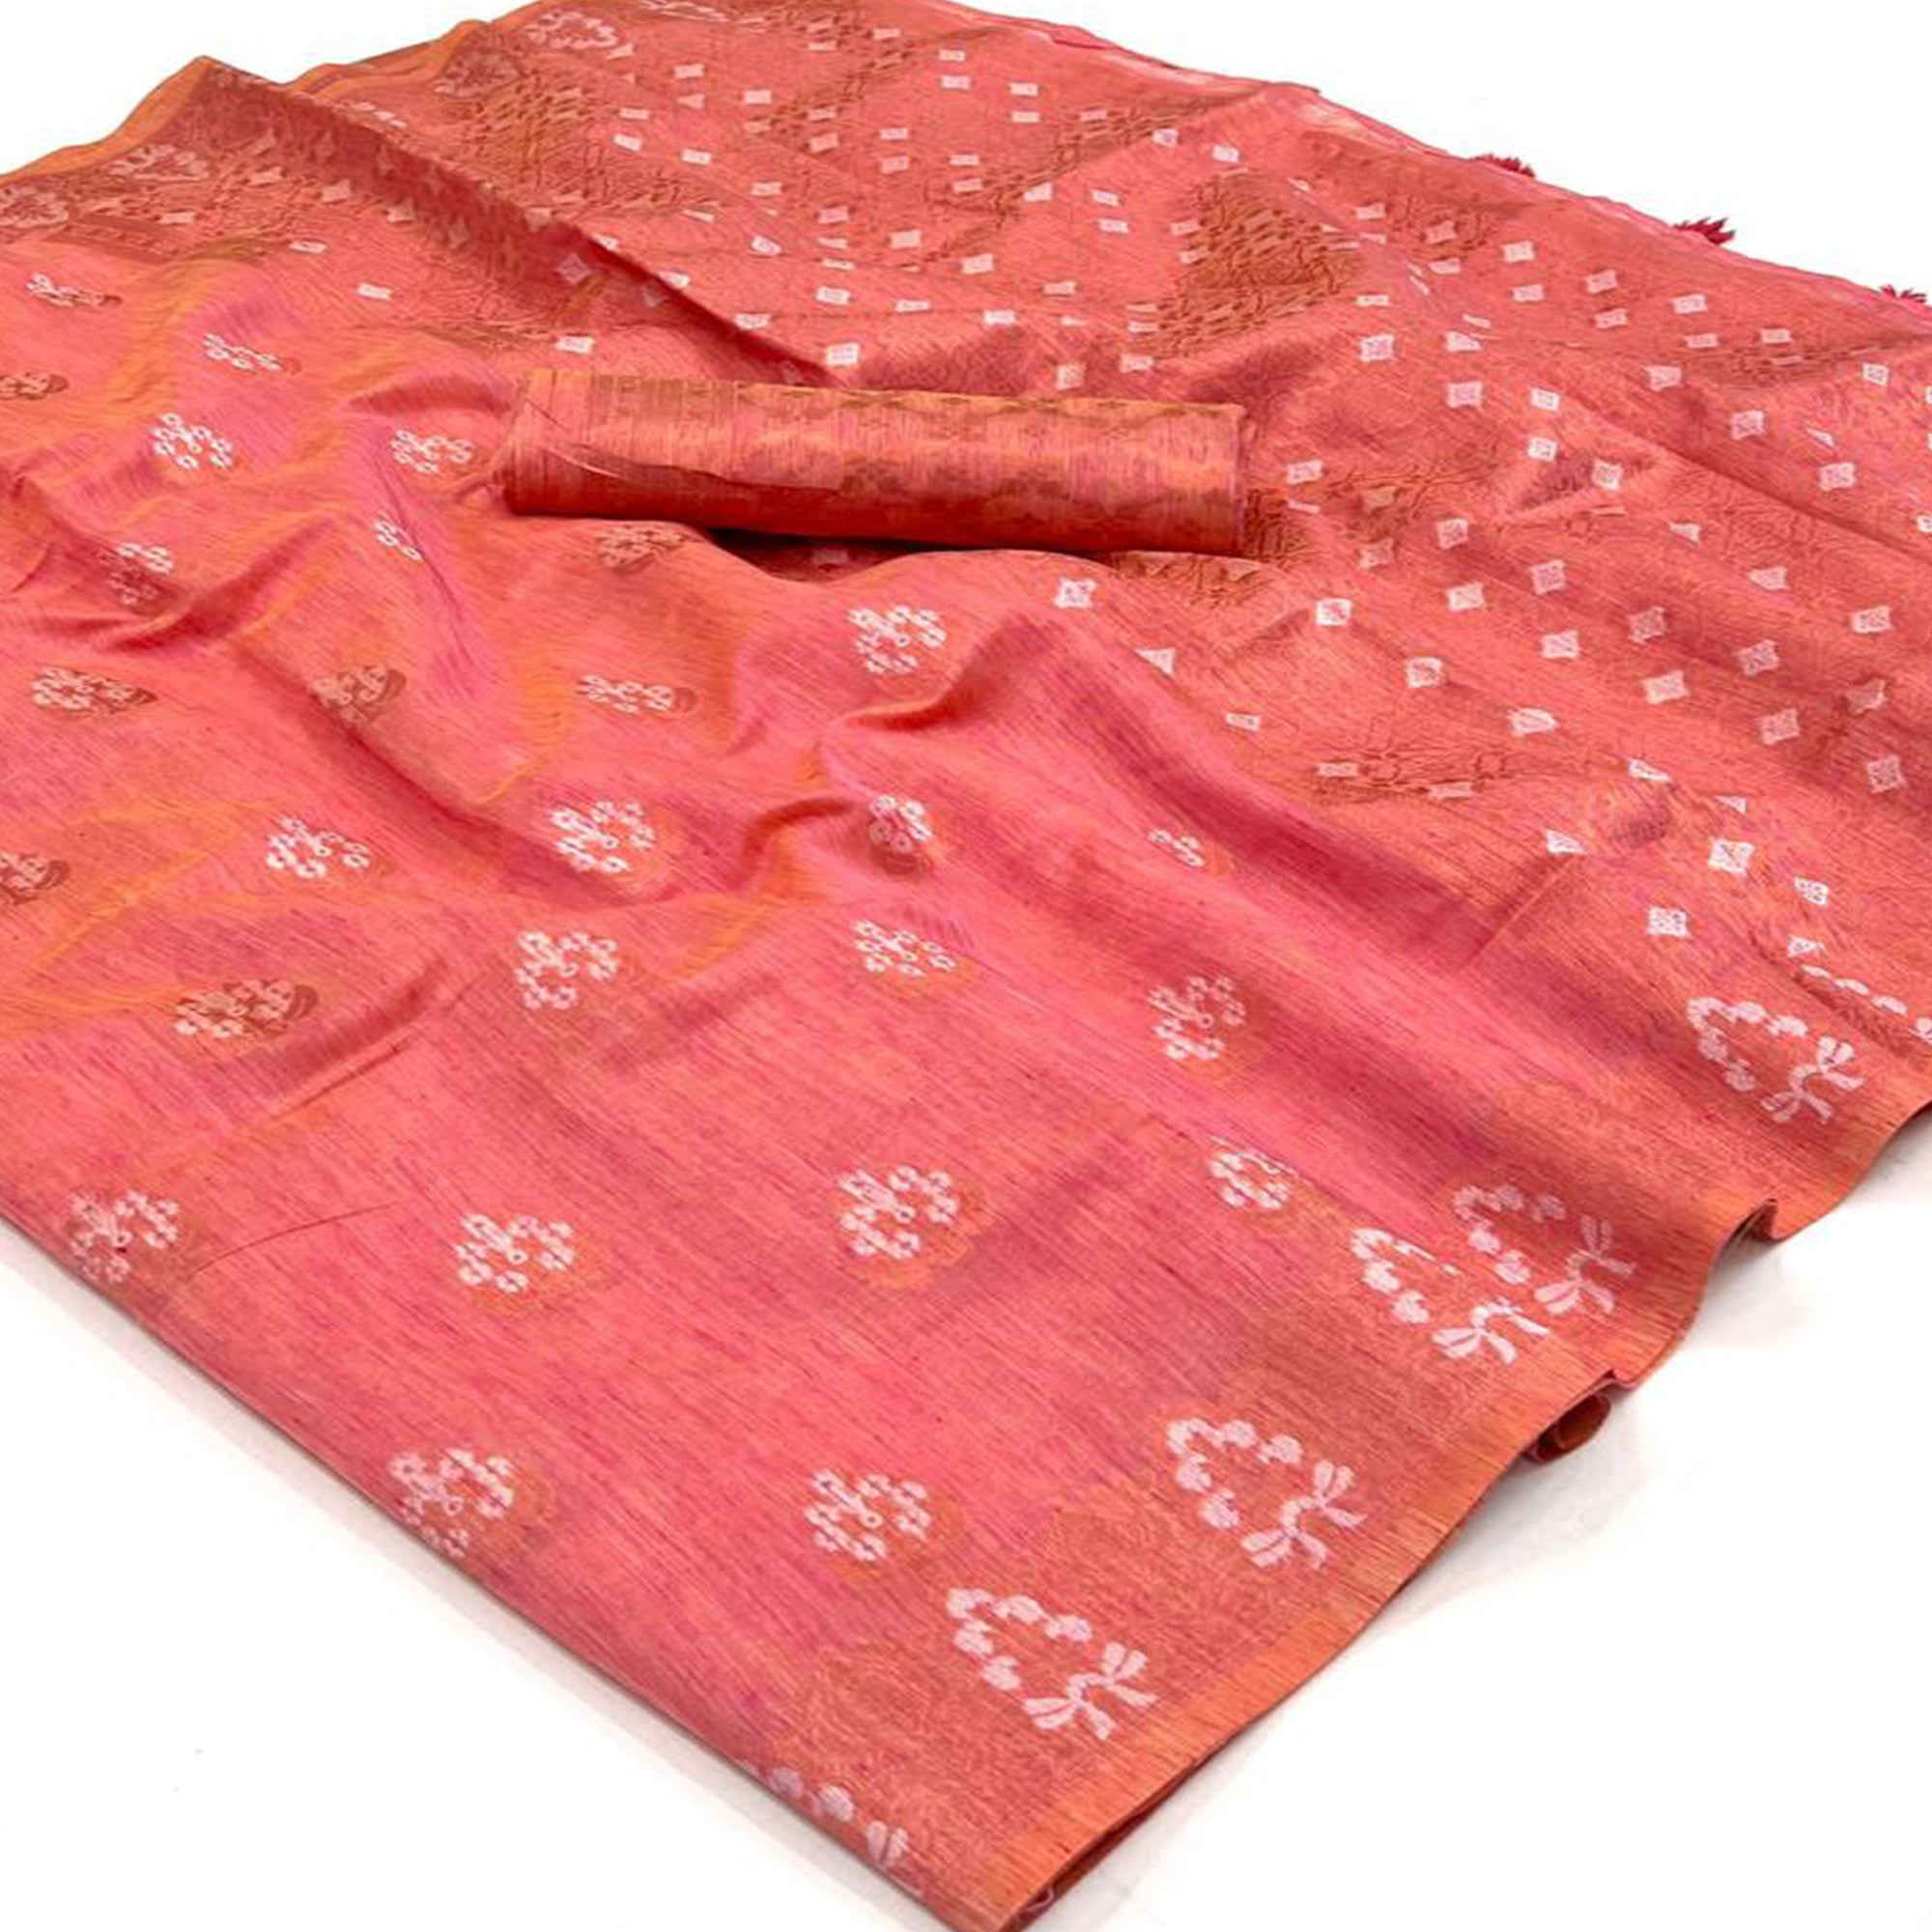 Salmon Pink Woven Linen Saree With Tassels